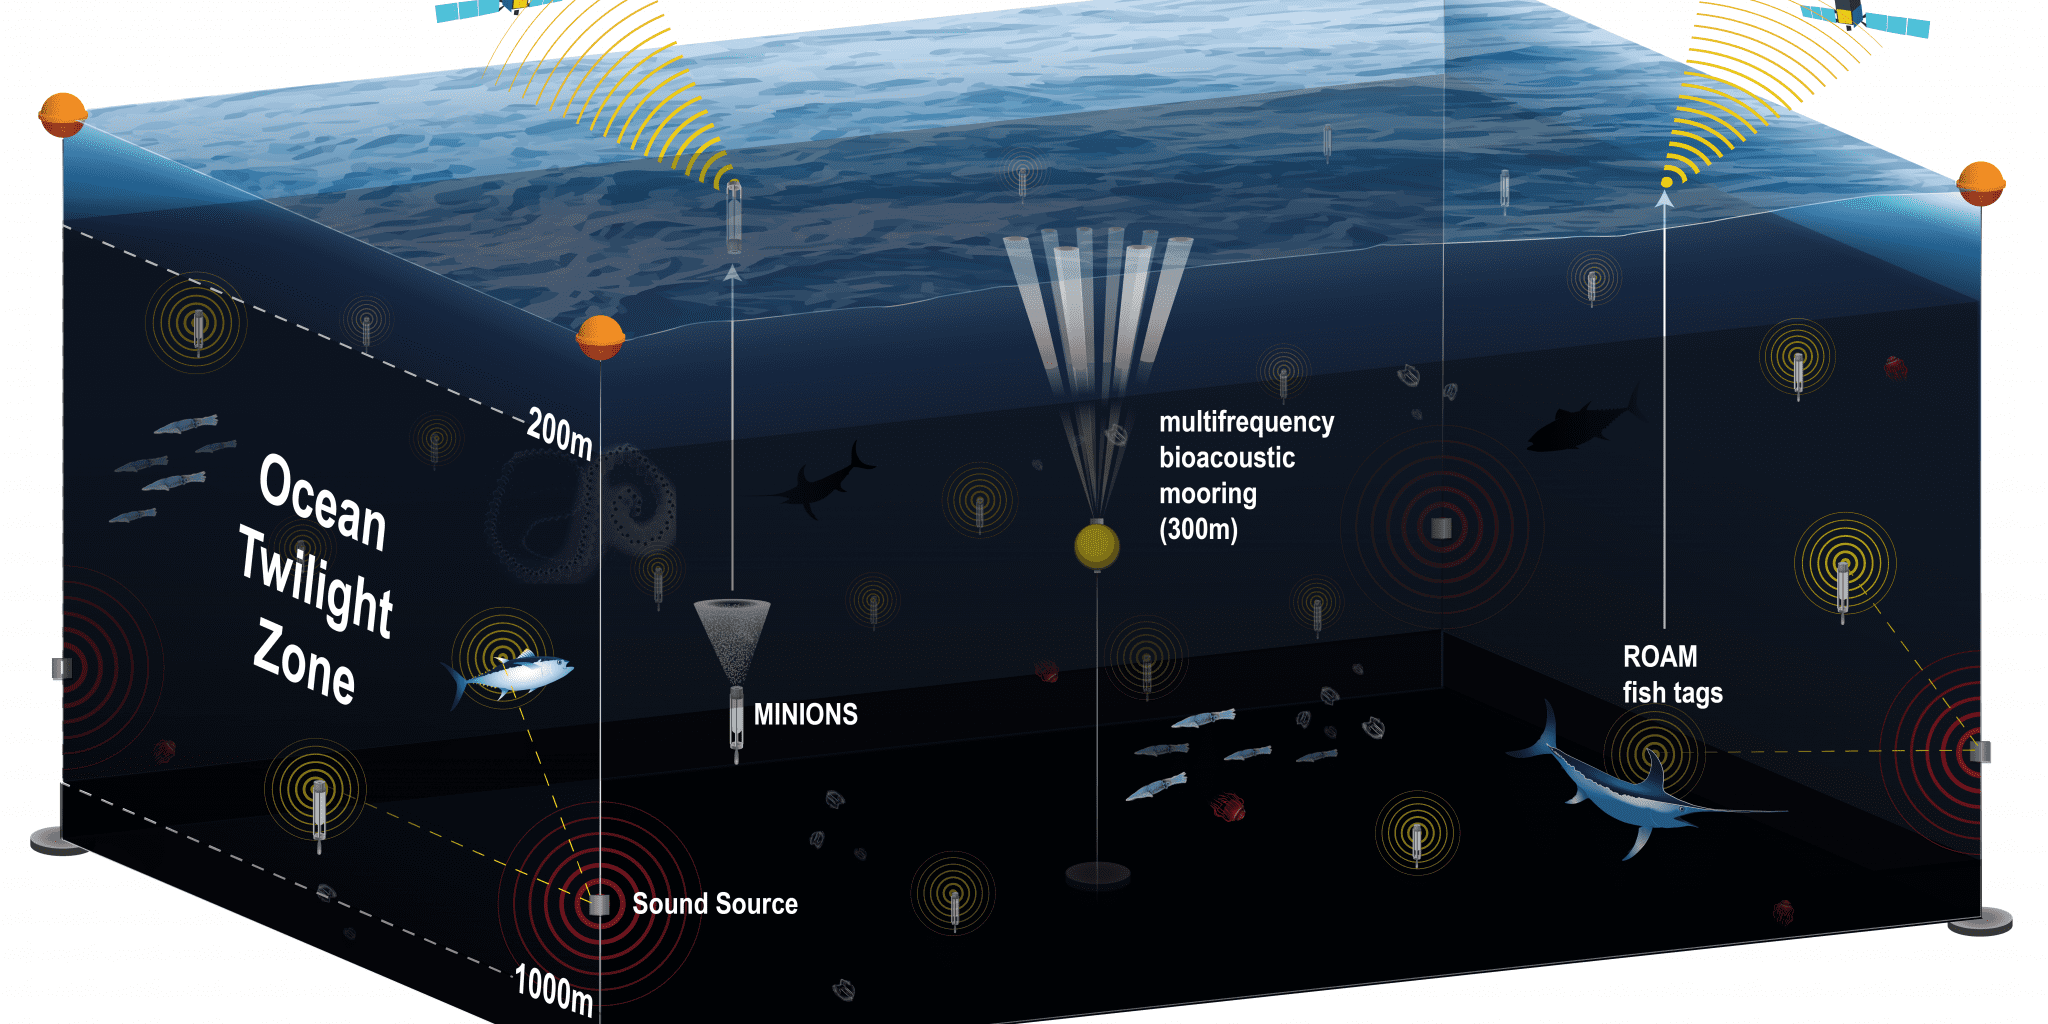 A new observation network will give scientists a comprehensive view of the twilight zone, or mesopelagic. It will use several different technologies including moored buoys equipped with acoustic survey systems; a swarm of optical and geochemical sensors; and new fish-tracking tags that will continuously record the position of major predators such as sharks and tuna. All of these components will connect to the network’s buoys using acoustic signals underwater and an Iridium satellite link at the surface.